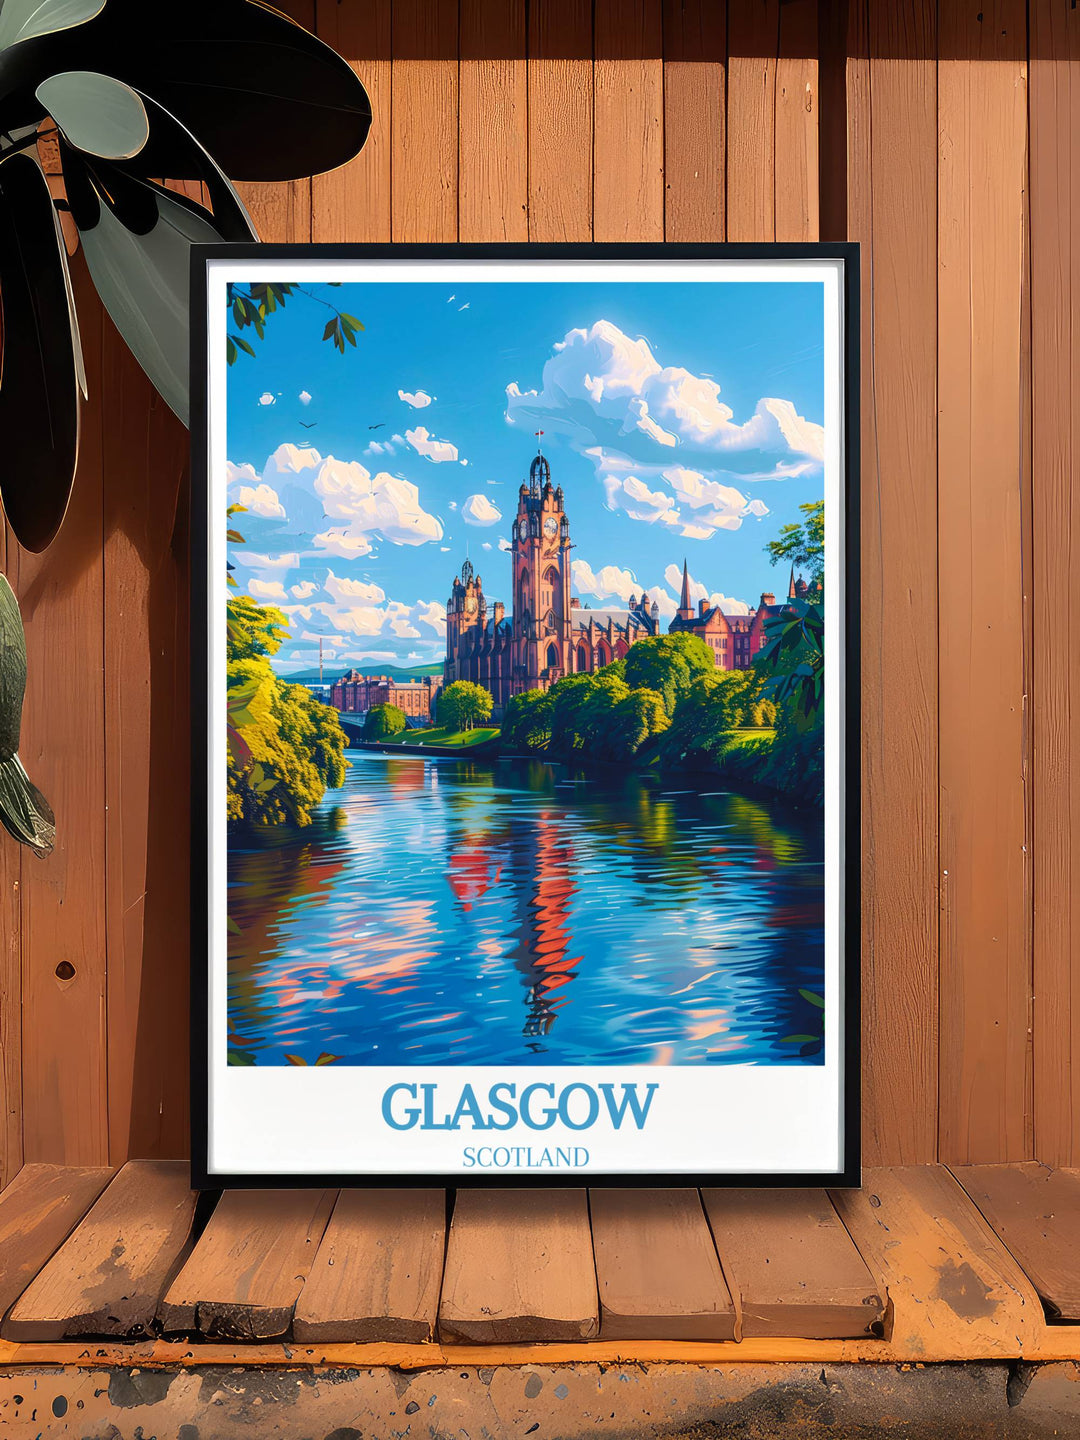 Colorful artwork reflecting Glasgows rich heritage and artistic diversity, capturing the citys vibrant spirit.